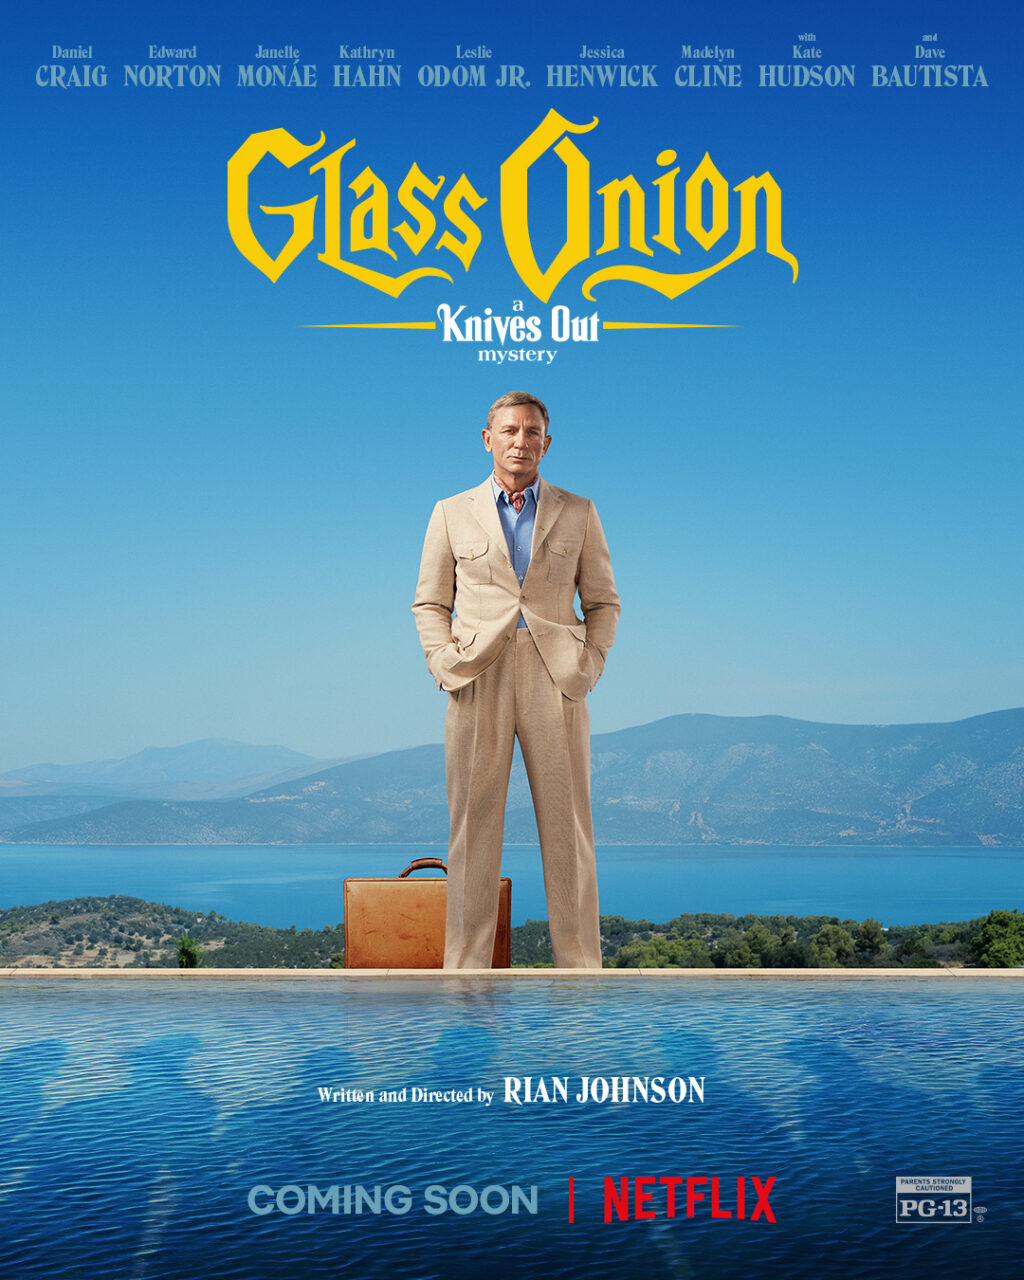 Glass Onion, A Knives Out Mystery poster (Netflix)